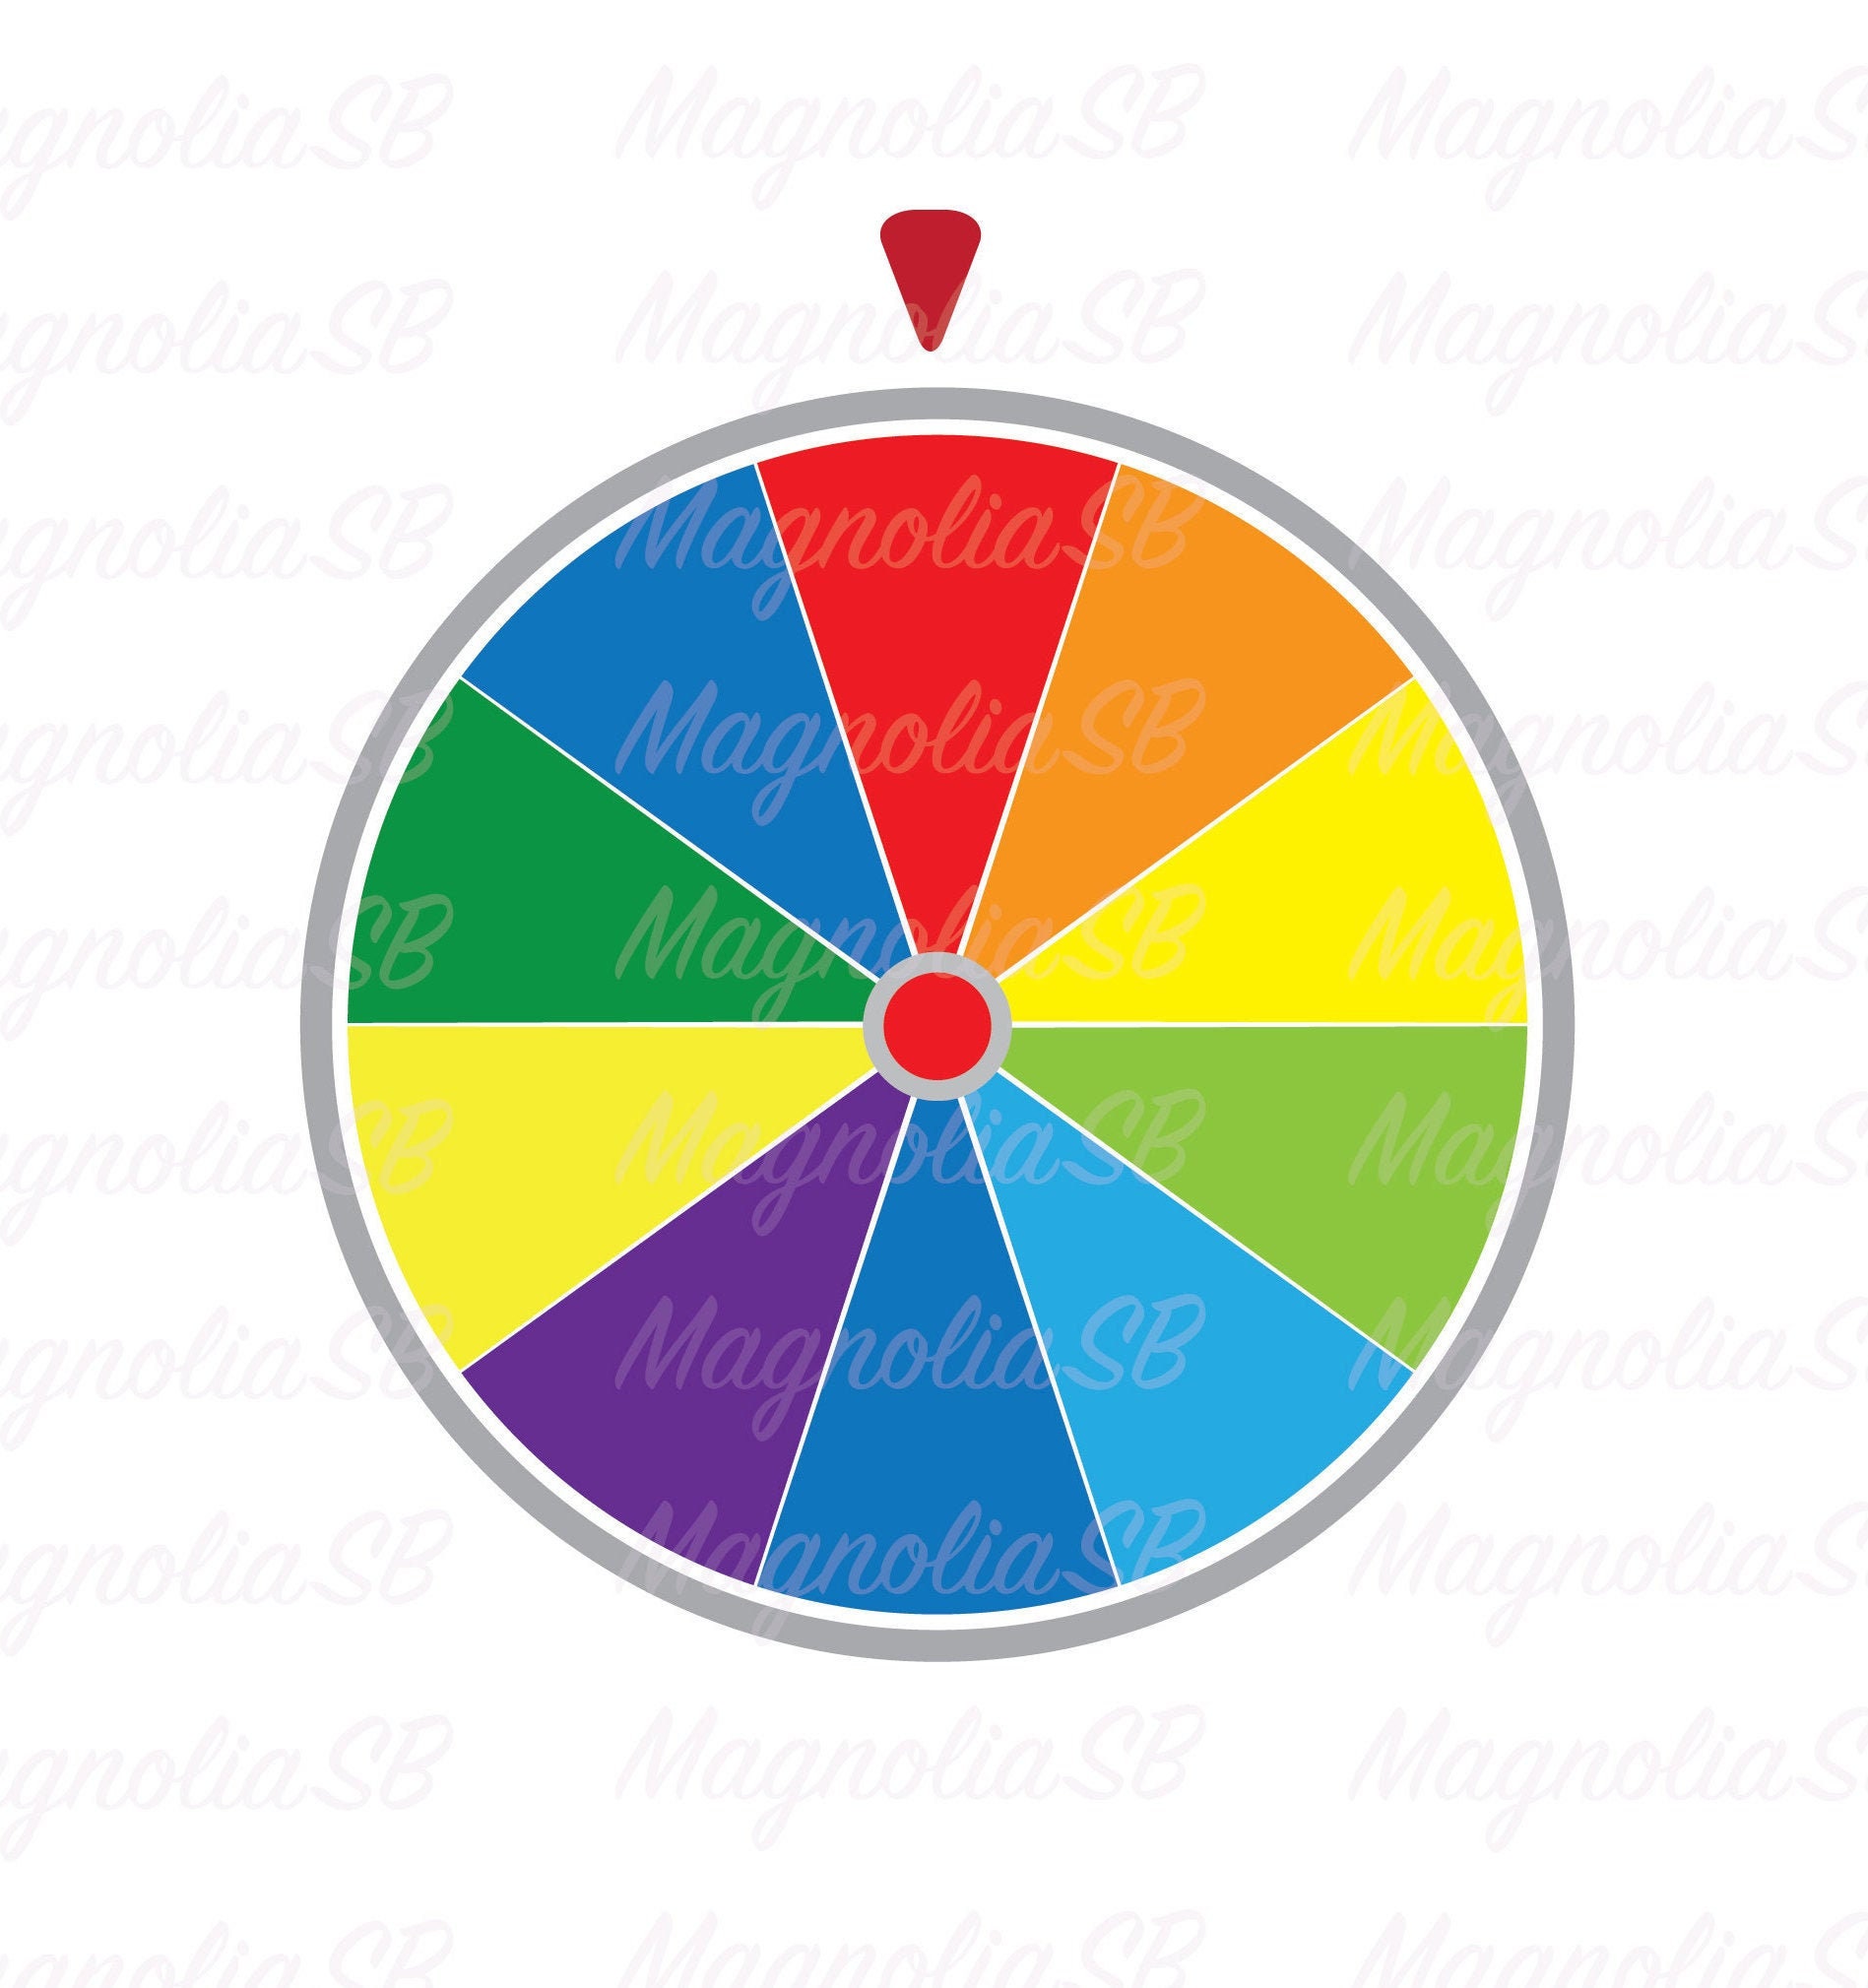 Game Board Spinner svg, dxf, wheel of fortune SVG, wheel PNG, vector, EPS,  game, fun activity svg, wheel silhouette, shape